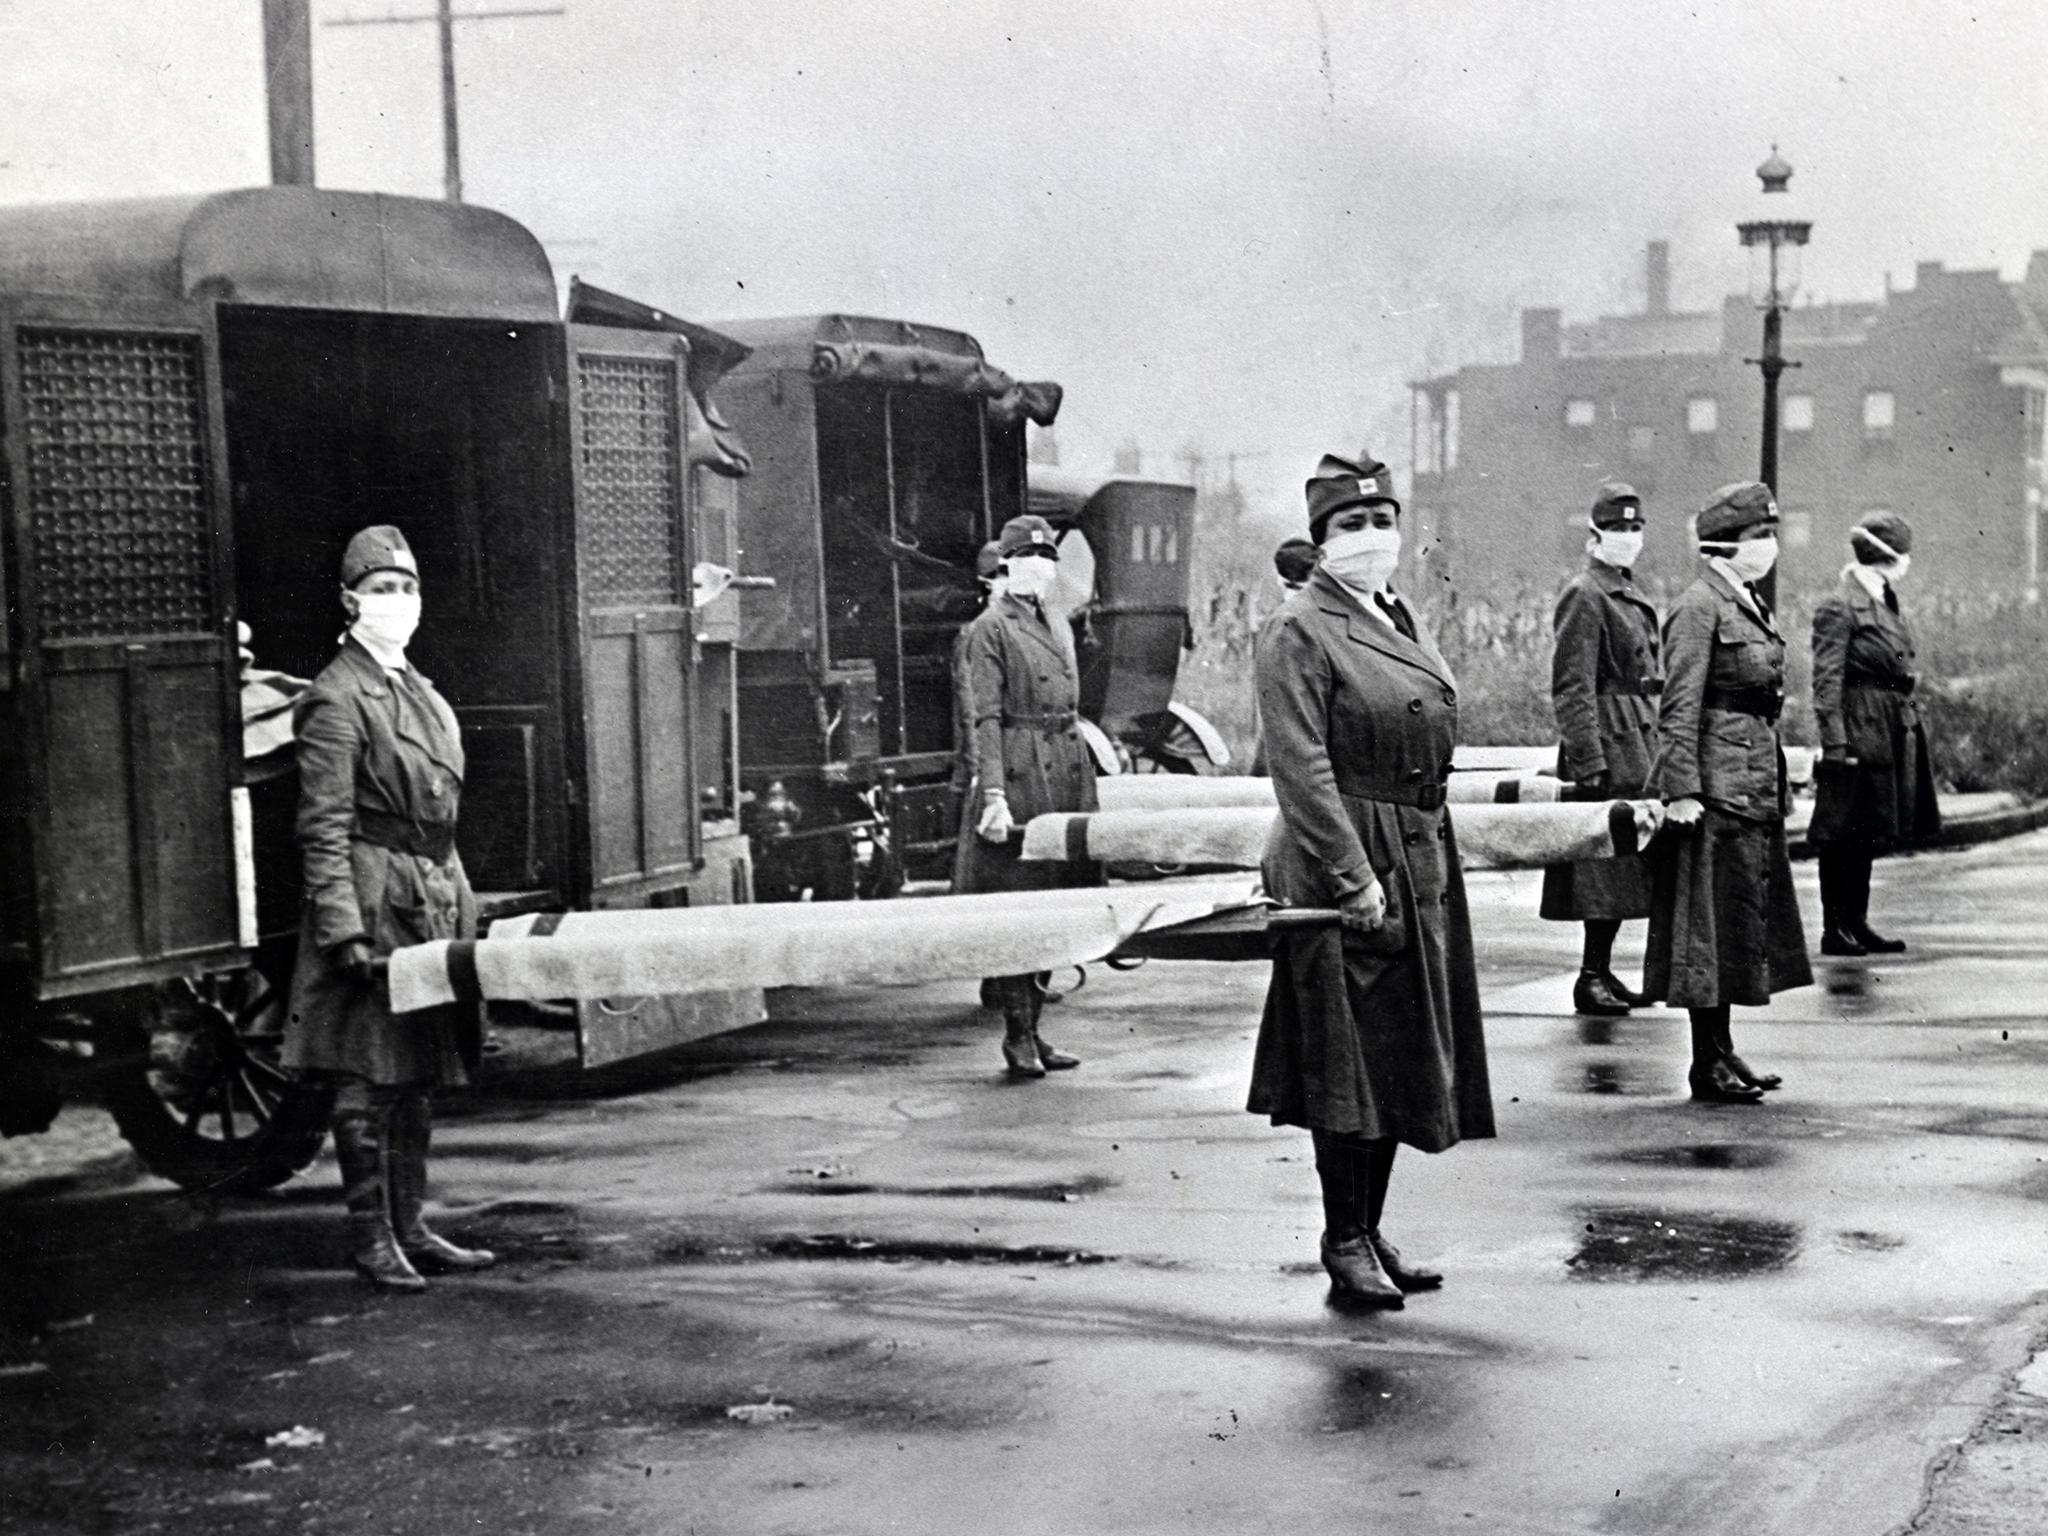 St Louis Red Cross Motor Corps on duty during the Spanish flu pandemic in 1918